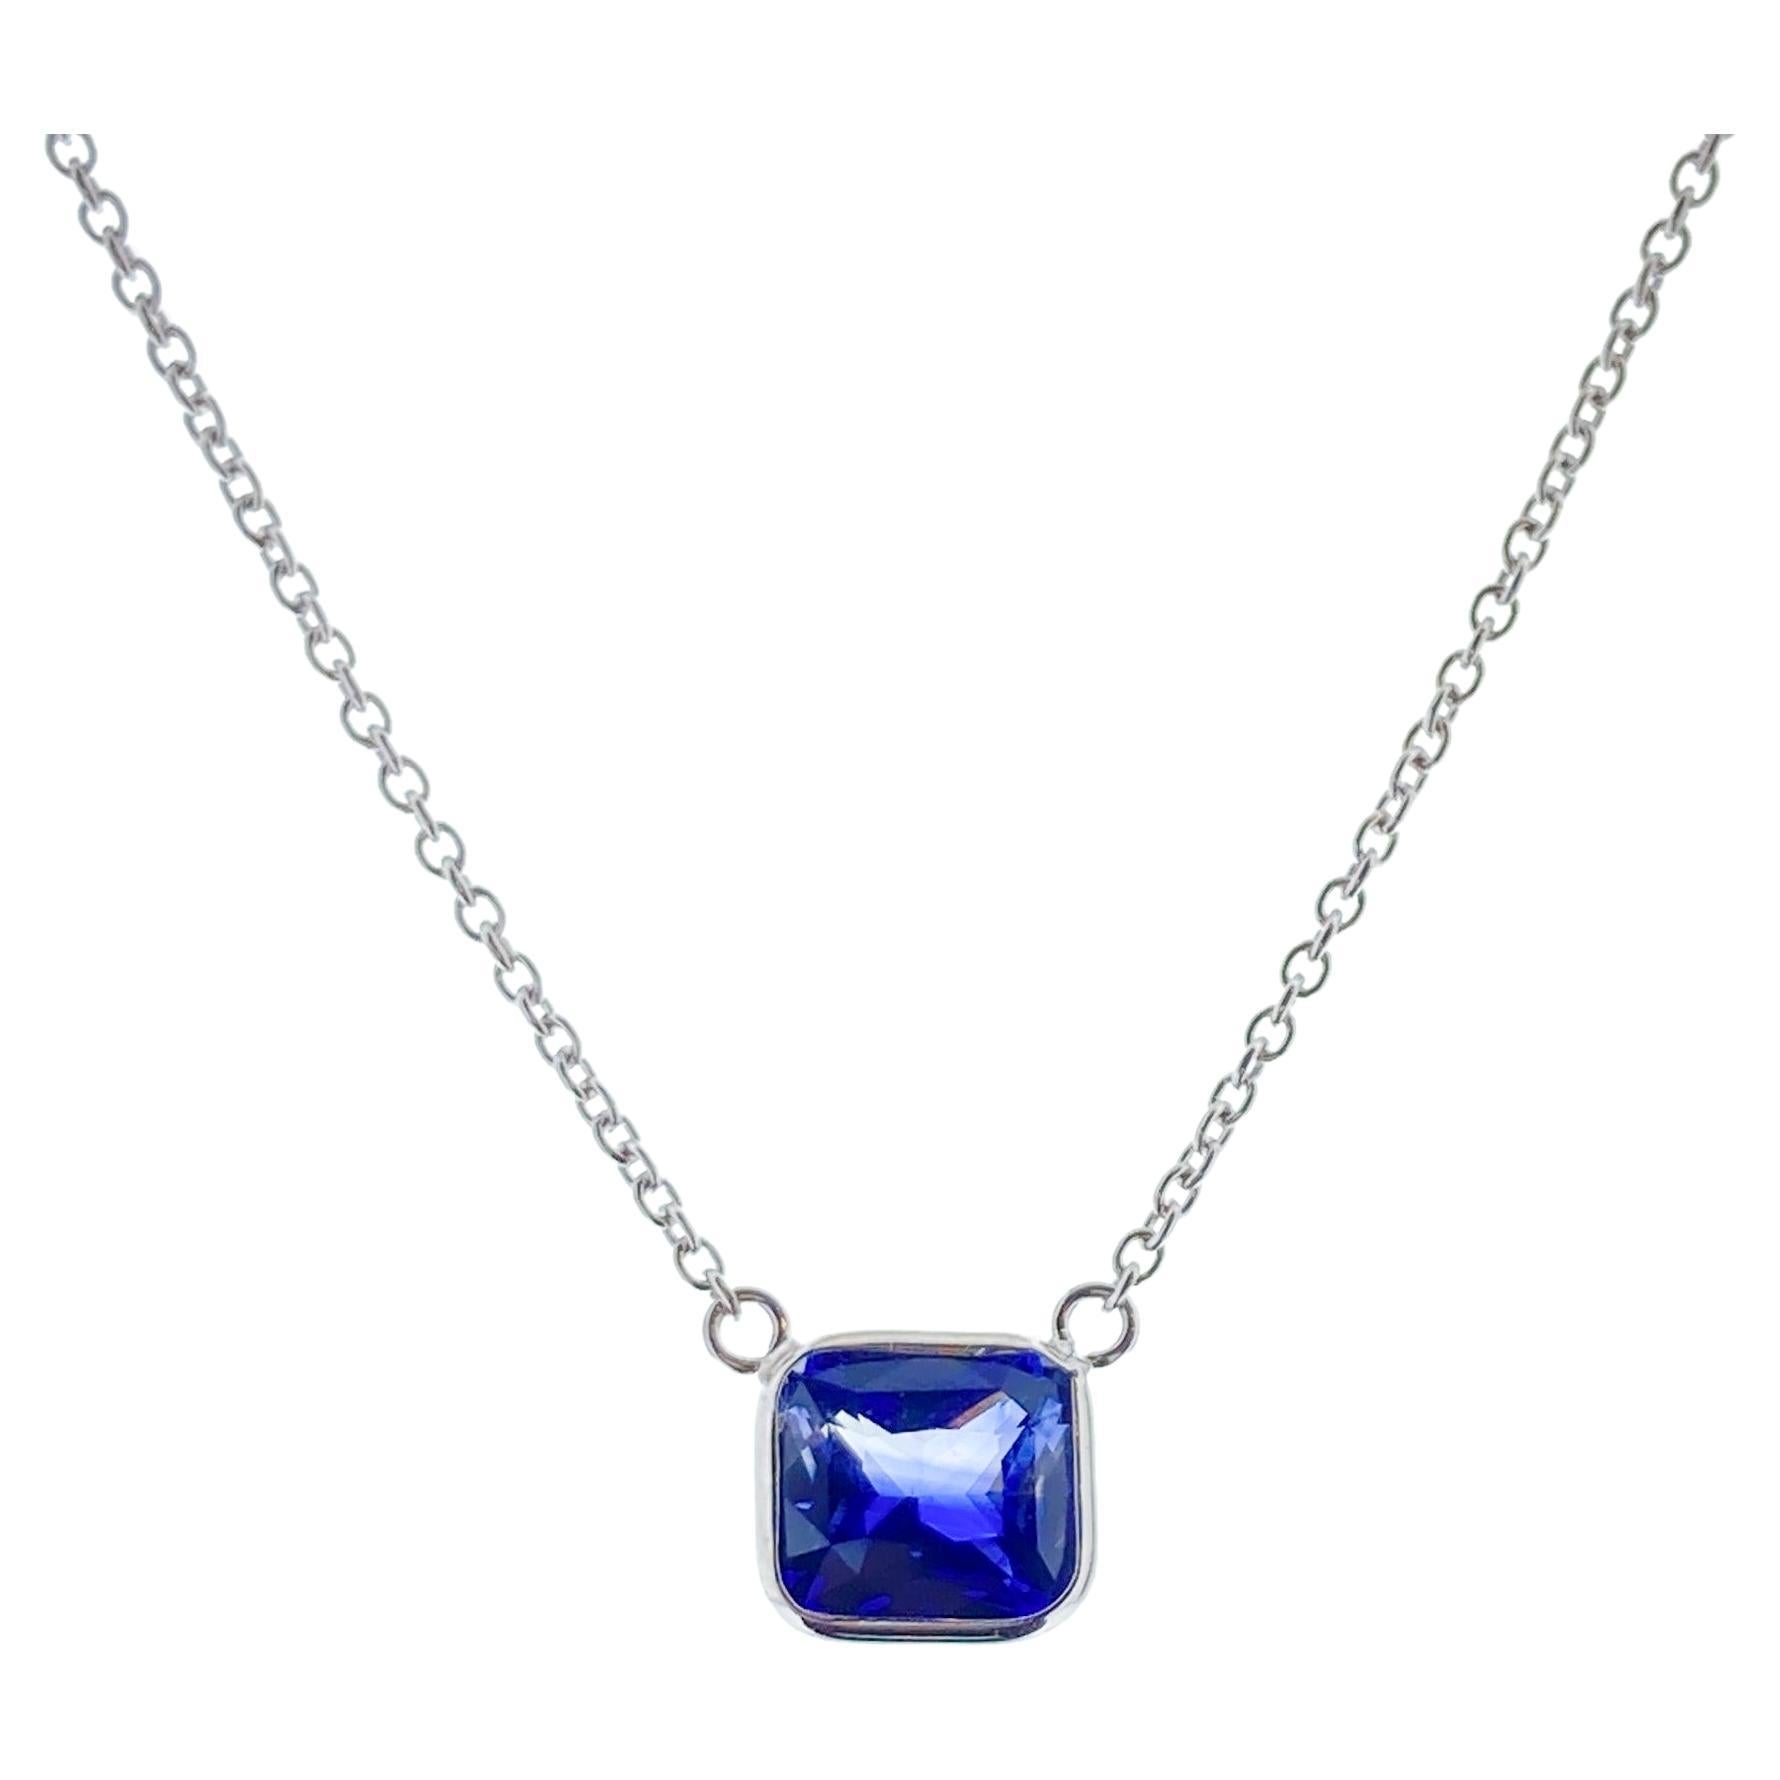 1.80 Carat Blue Octagonal Cut Sapphire Fashion Necklaces In 14K White Gold 